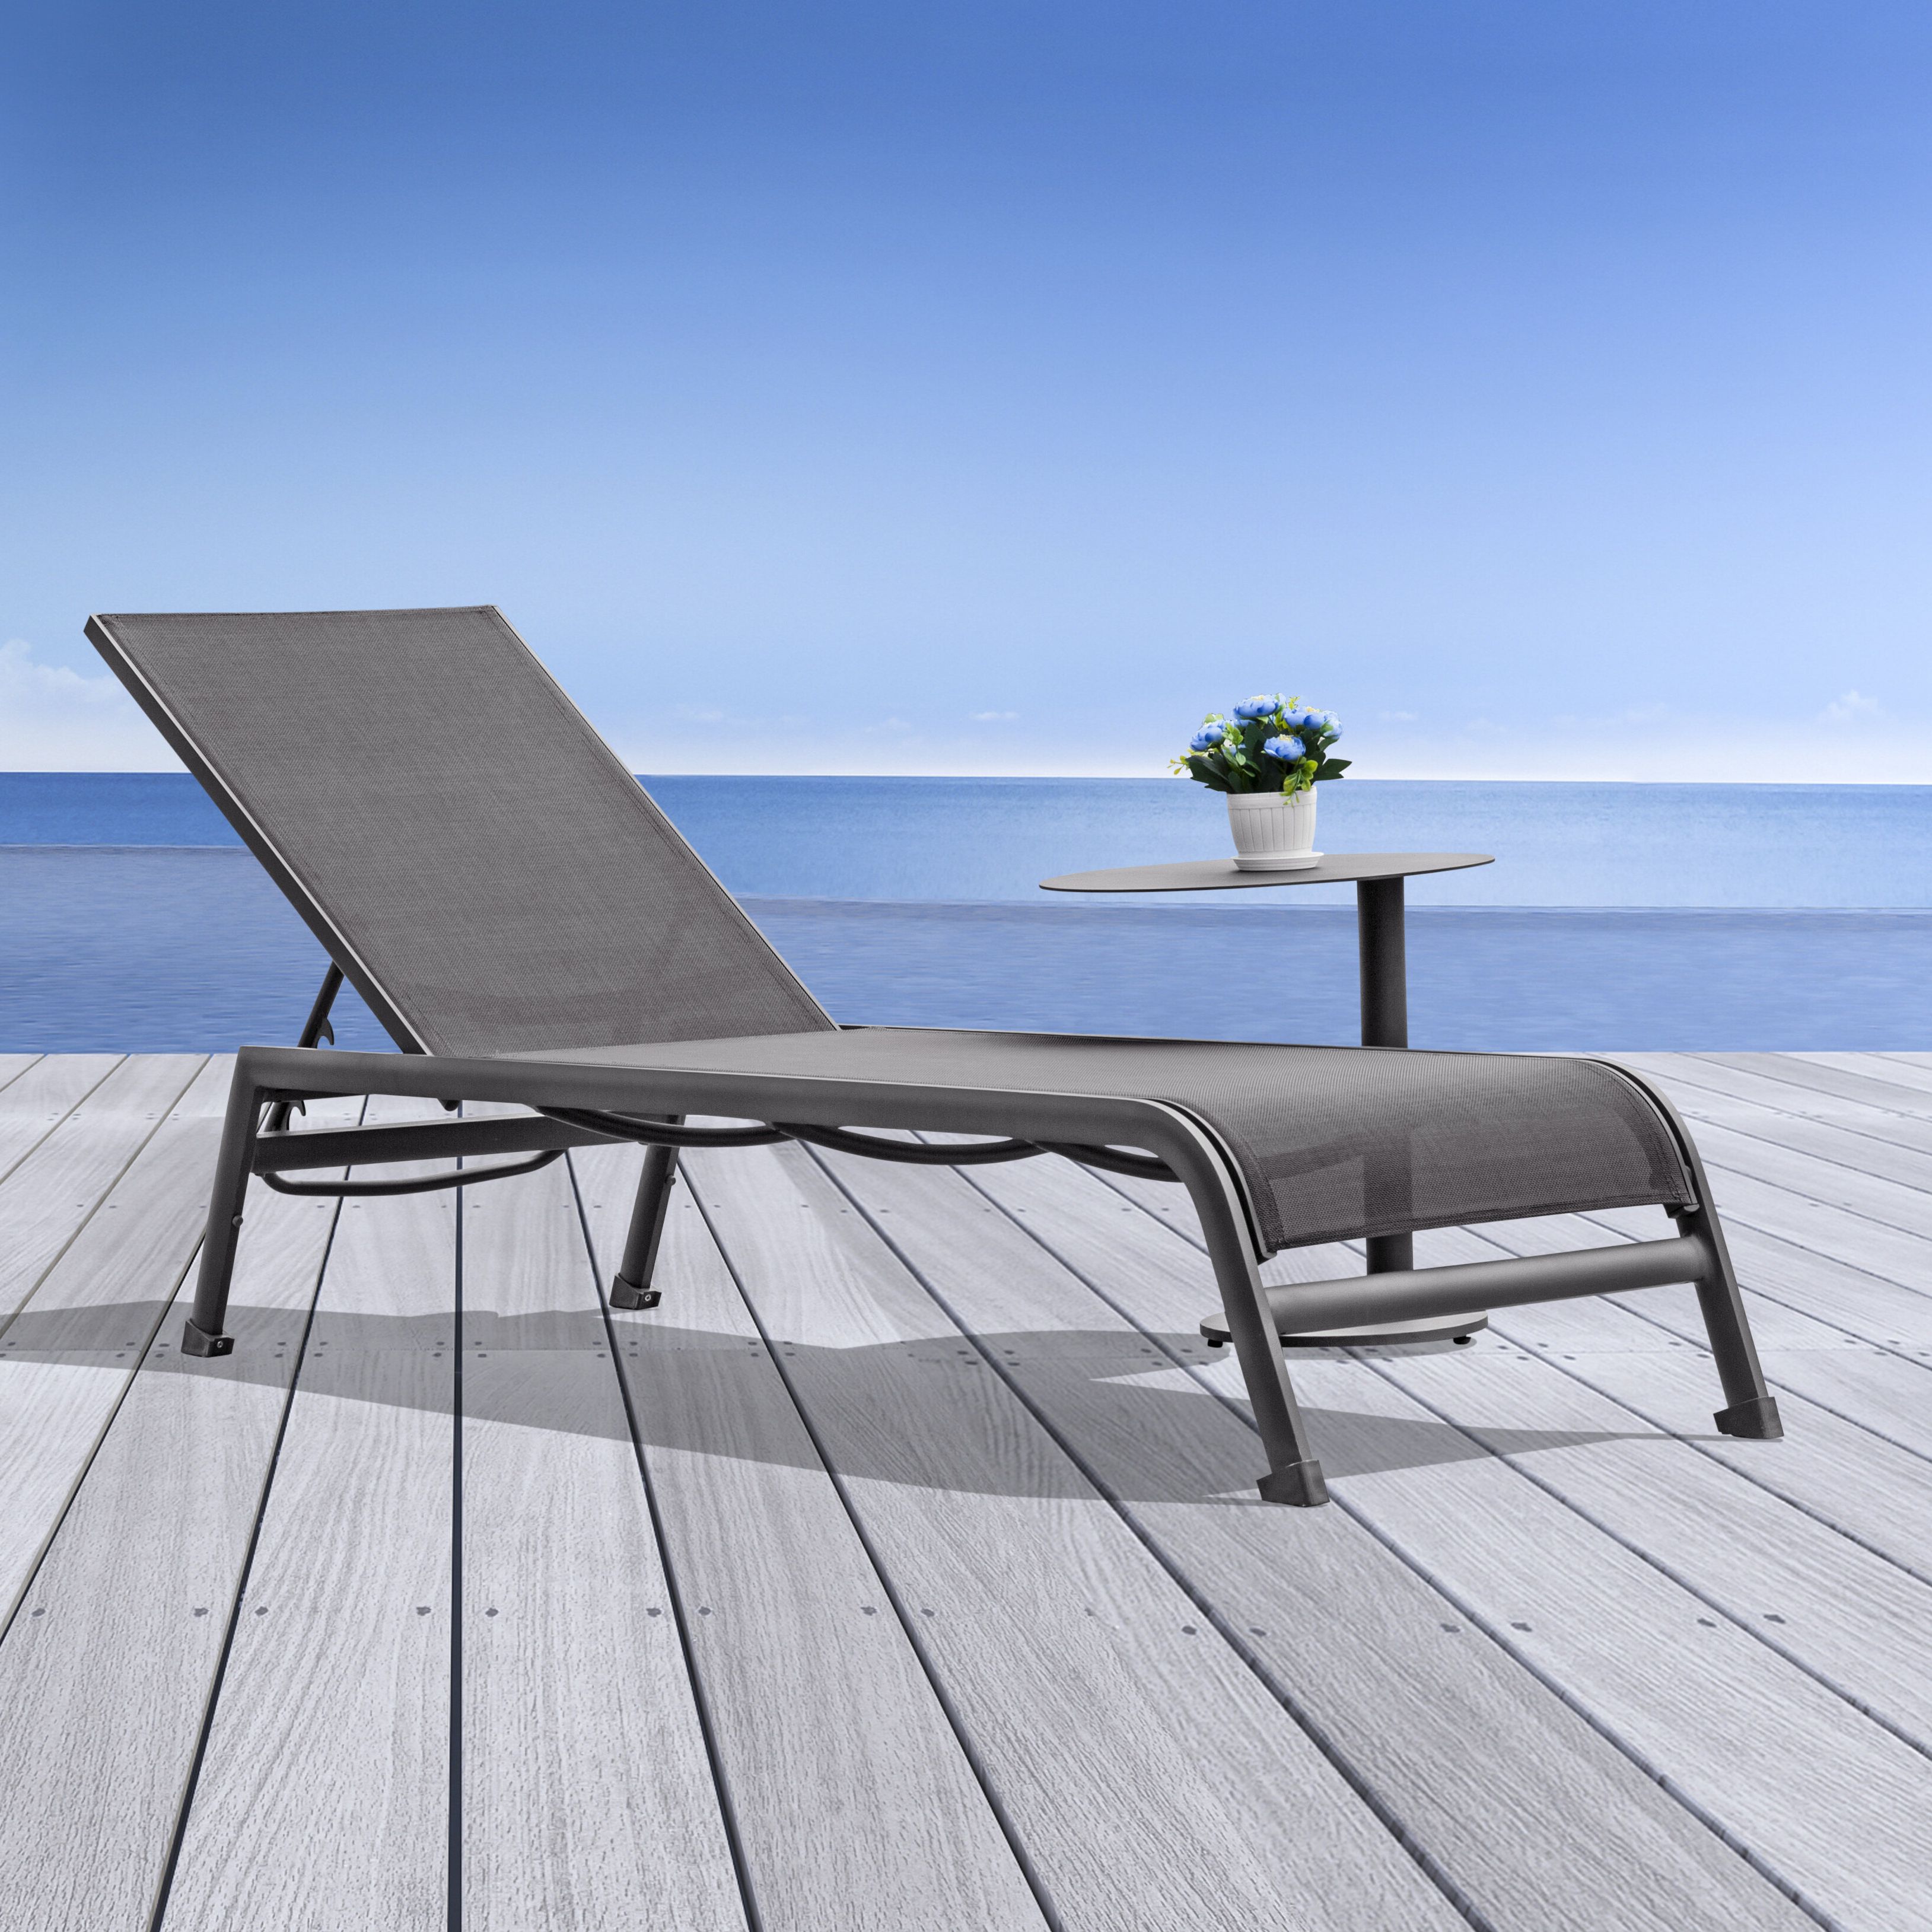 Widely Used Agustin Indoor/outdoor Reclining Chaise Lounge Regarding Glimpse Outdoor Patio Mesh Chaise Lounge Chairs (View 20 of 25)